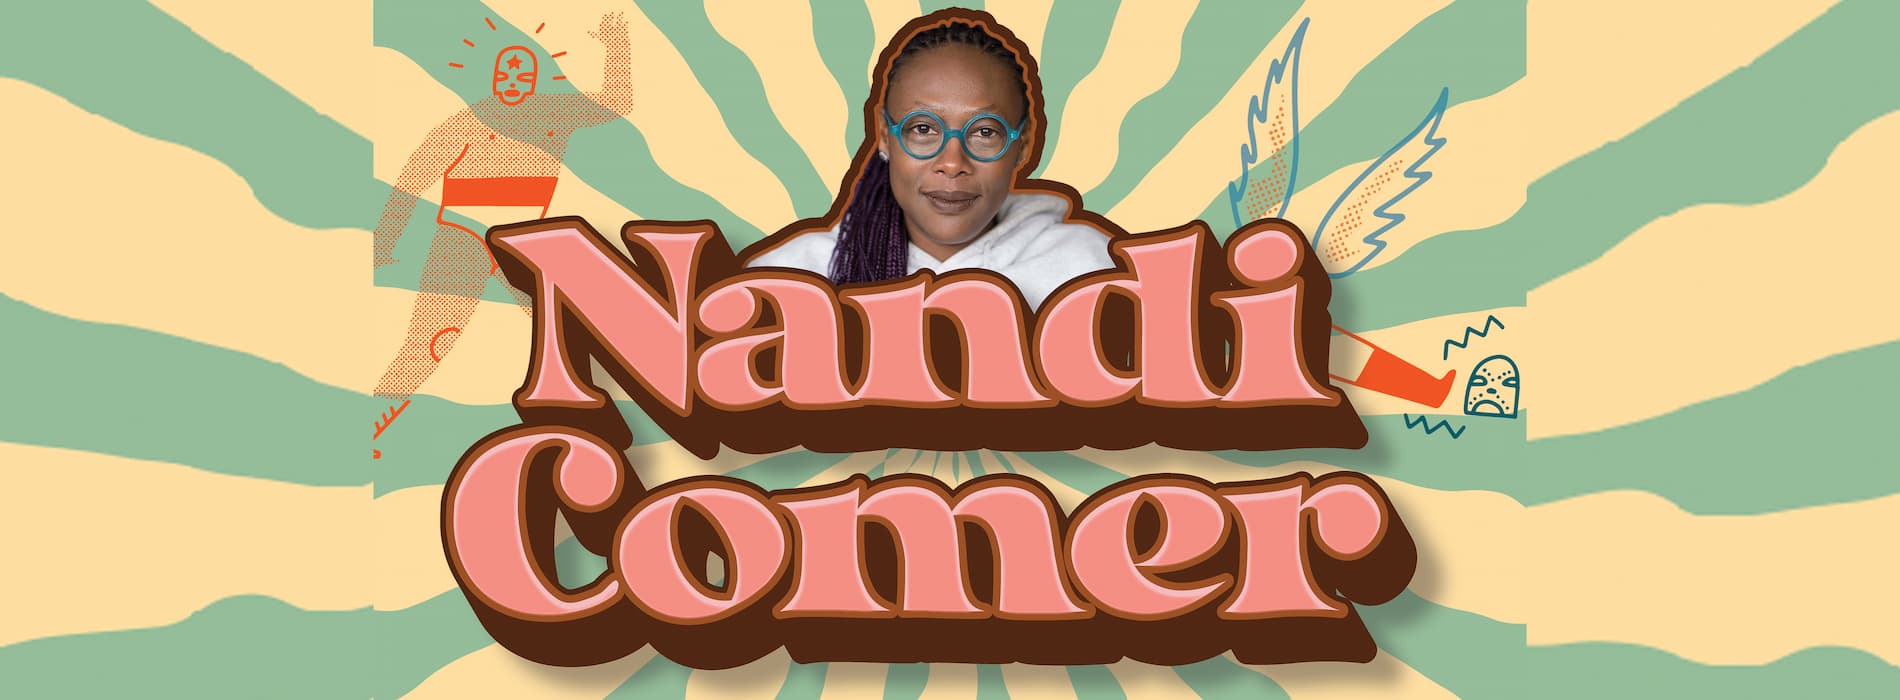 Nandi Comer banner image featuring her face against a starburst background with her name, Nandi Comer underneath her image